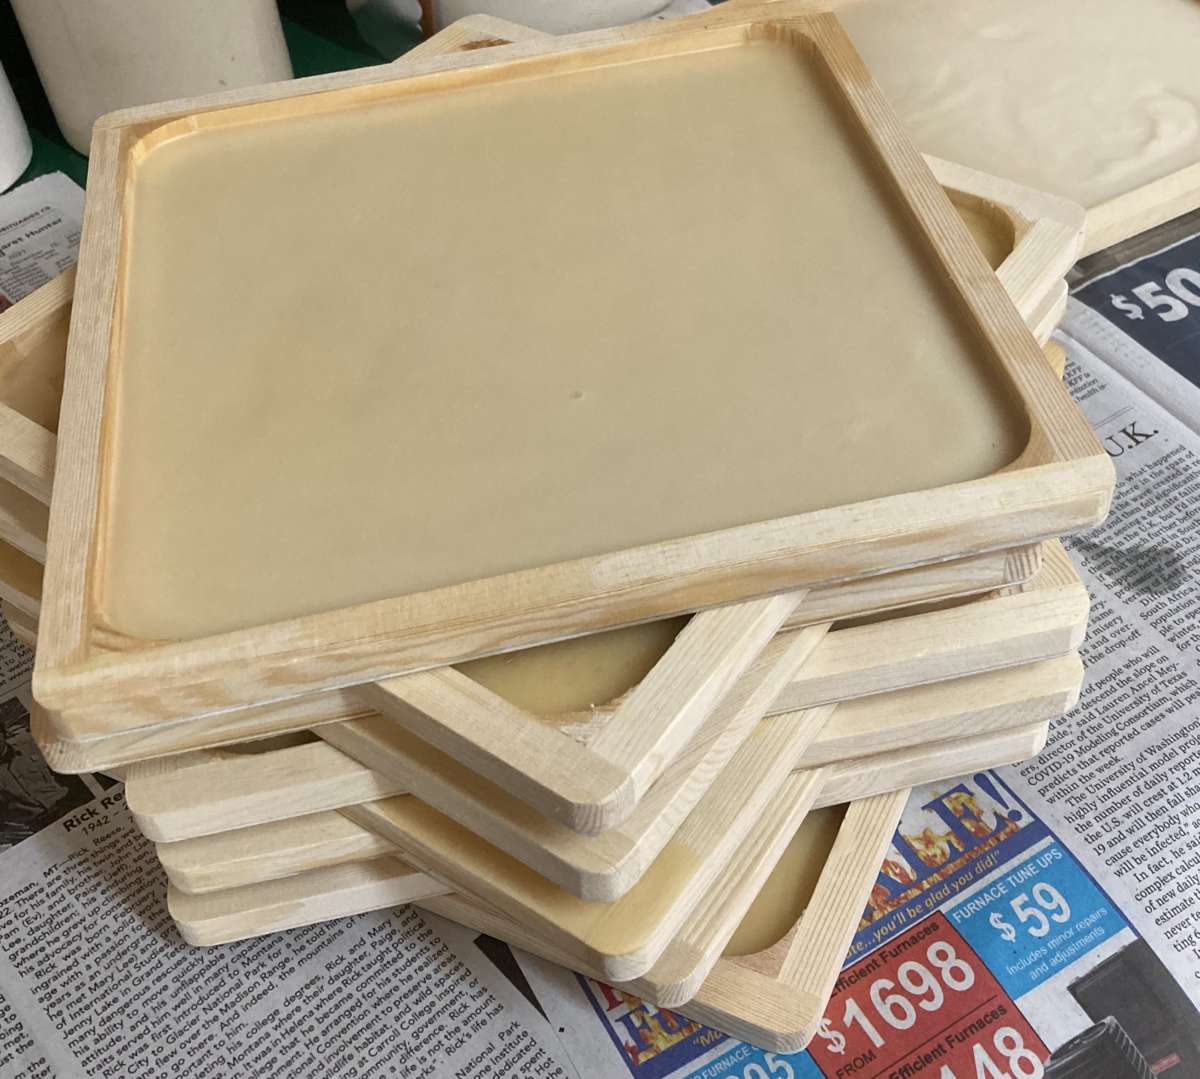 Wax tablets ready for writing